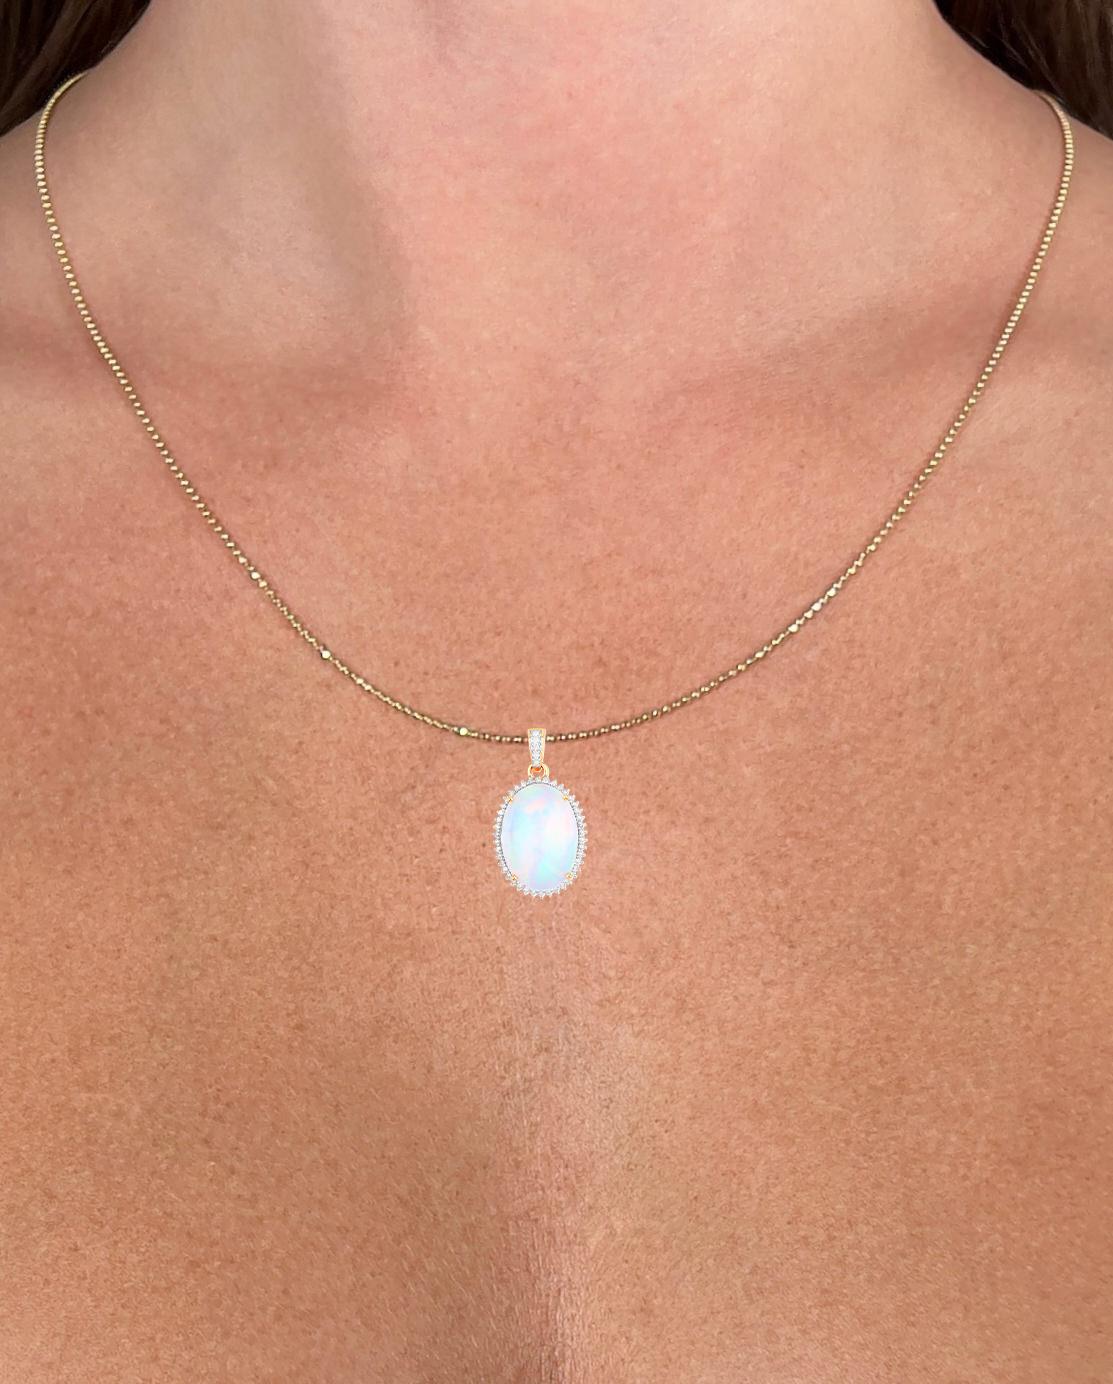 Contemporary Natural Opal Pendant Necklace Diamond Setting 7.08 Carats 14K Yellow Gold For Sale